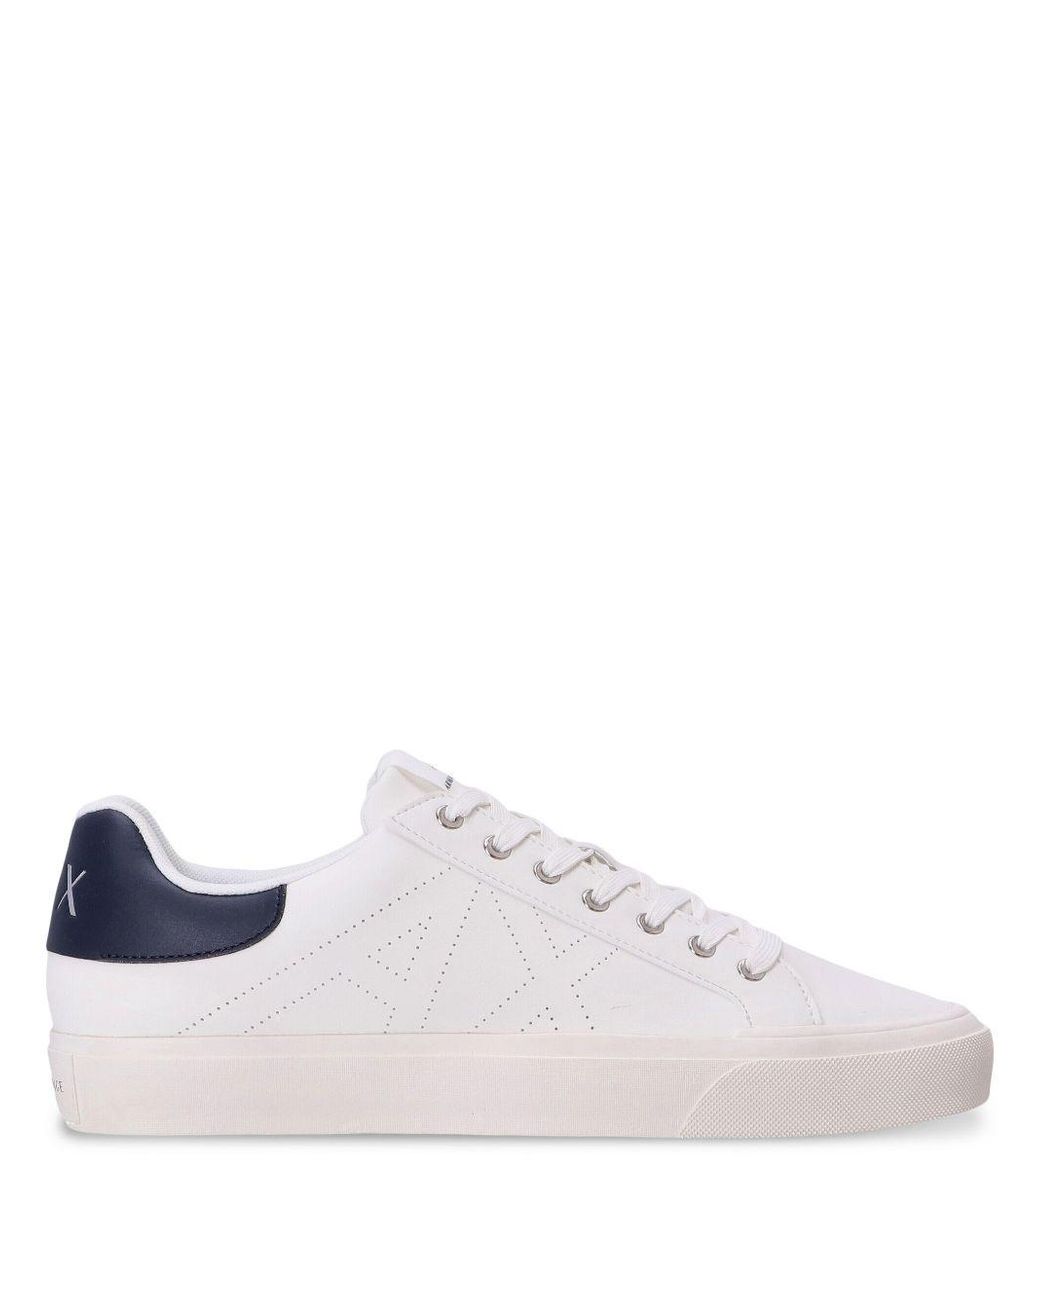 Armani Exchange Logo-perforated Leather Sneakers in White for Men | Lyst UK